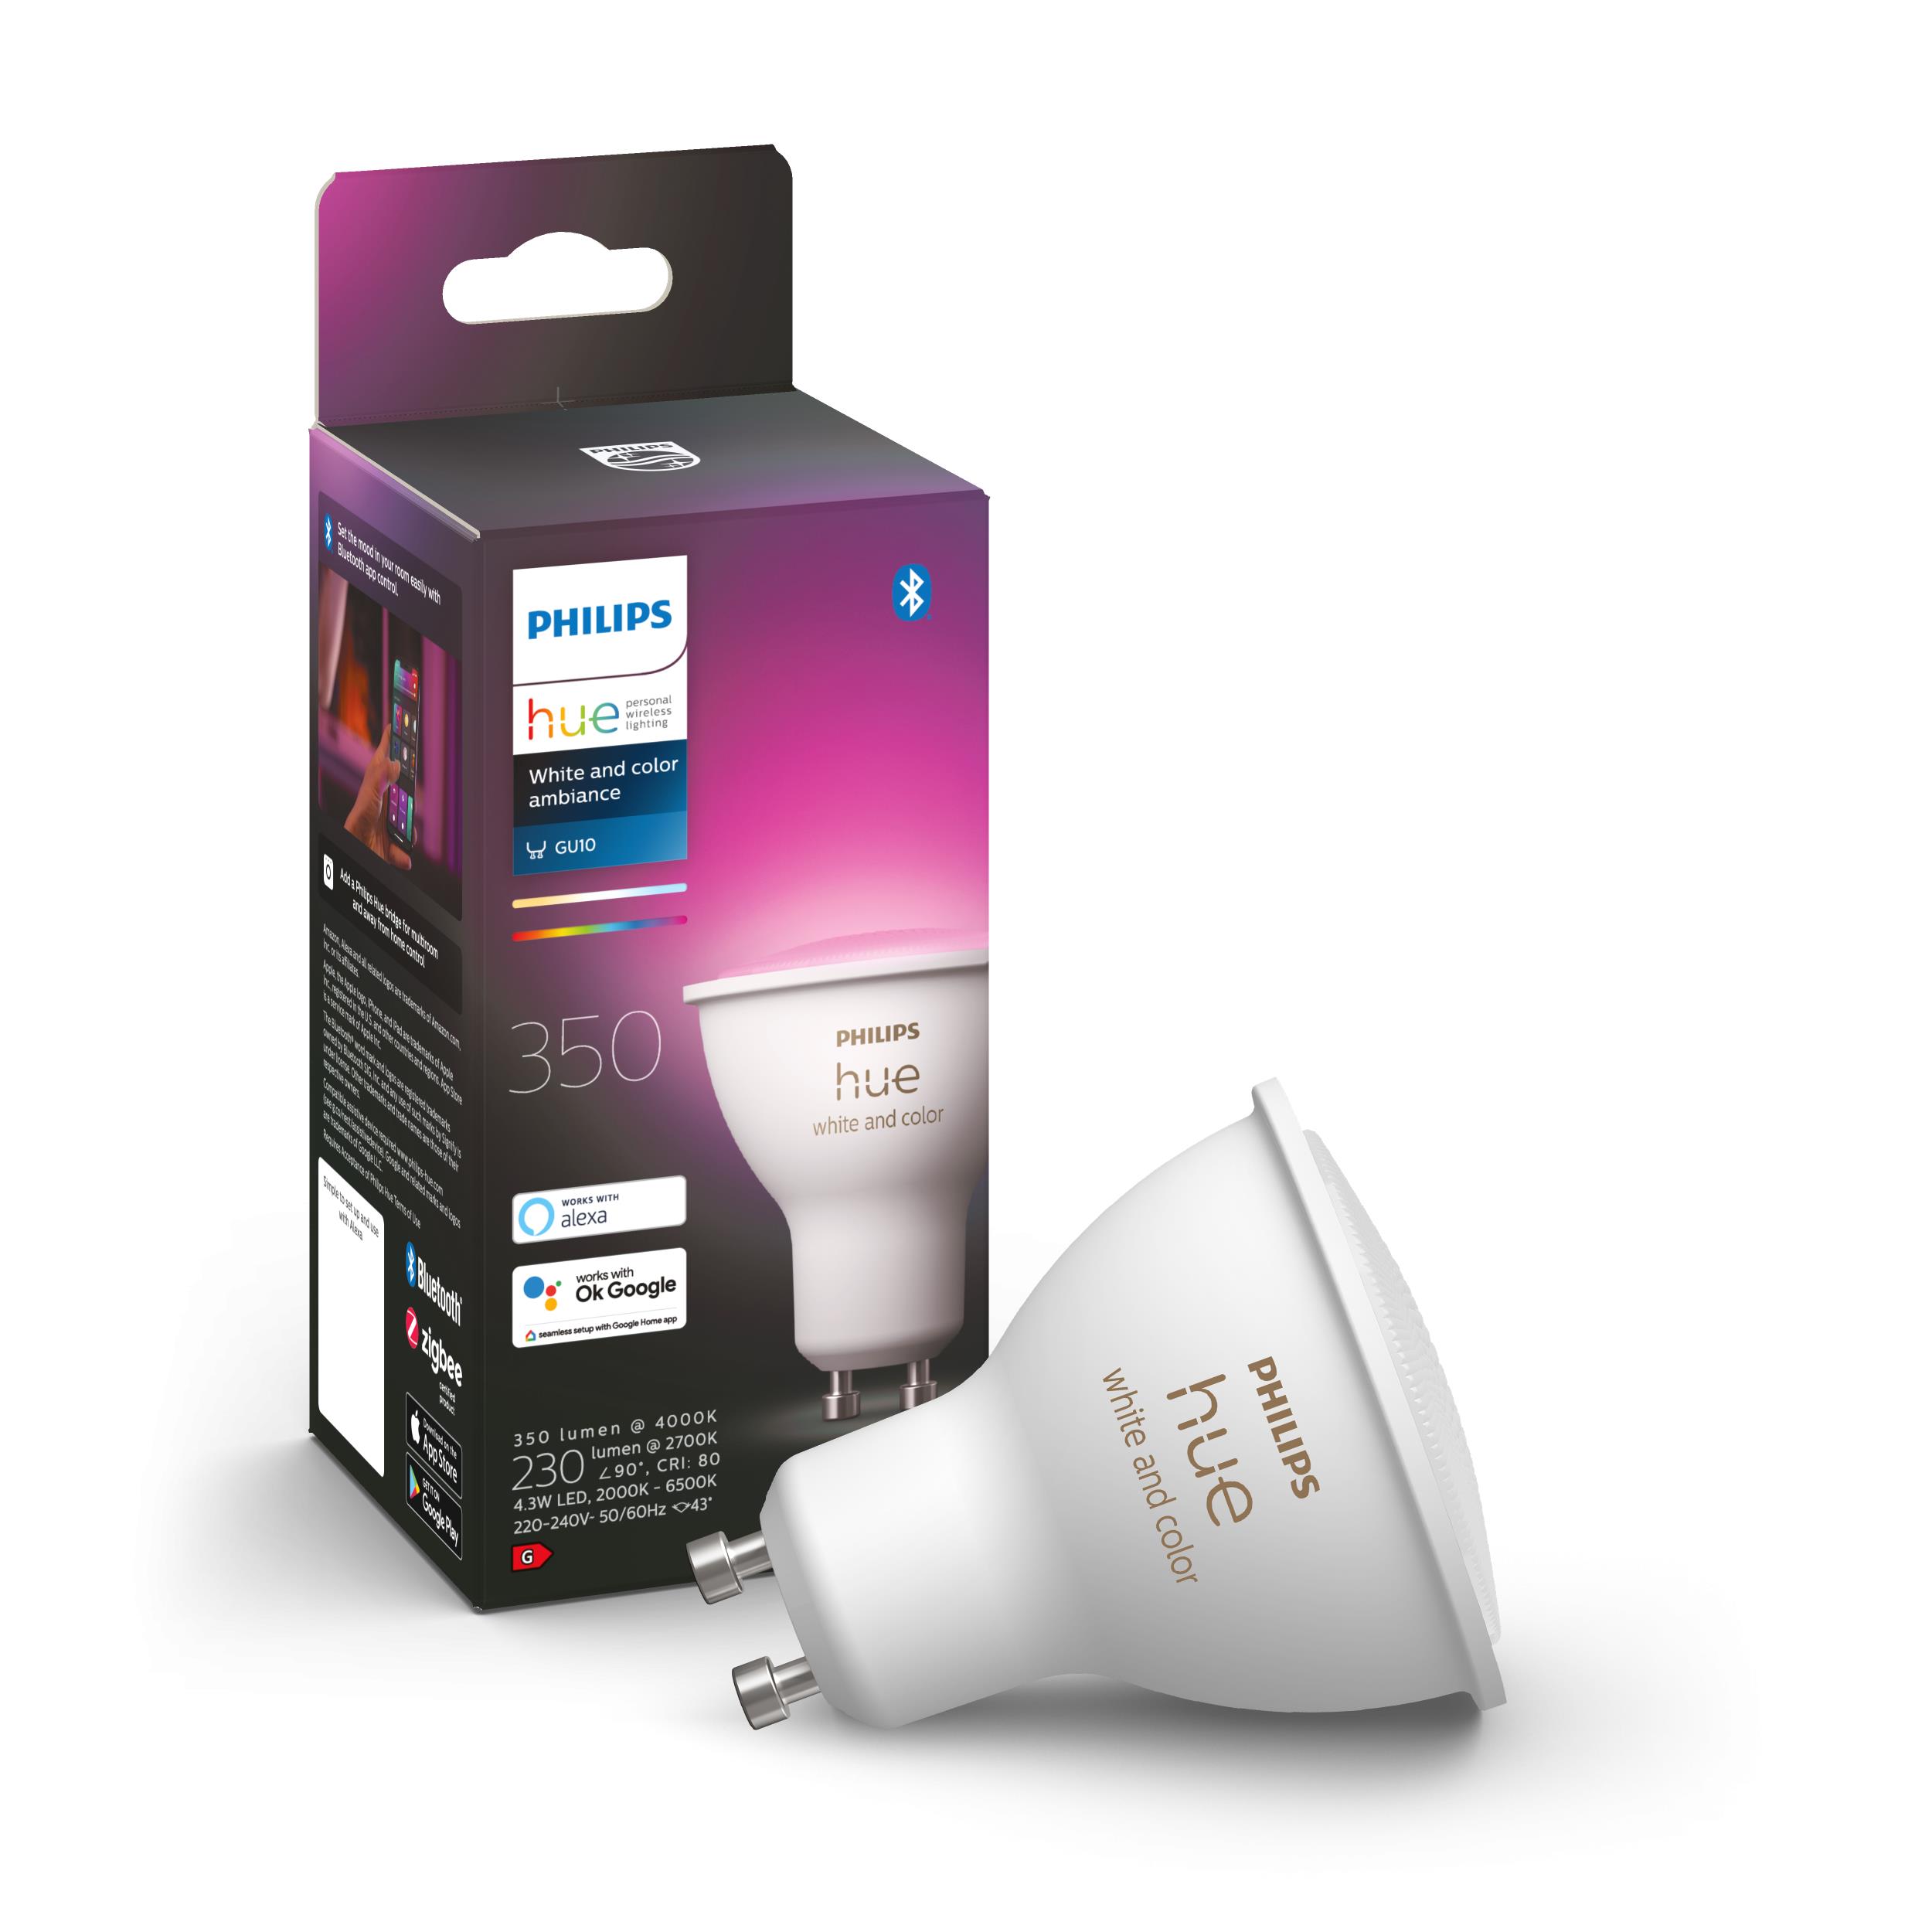 Bec LED Spot Philips Hue alb and Color Ambiance GU10 230lm